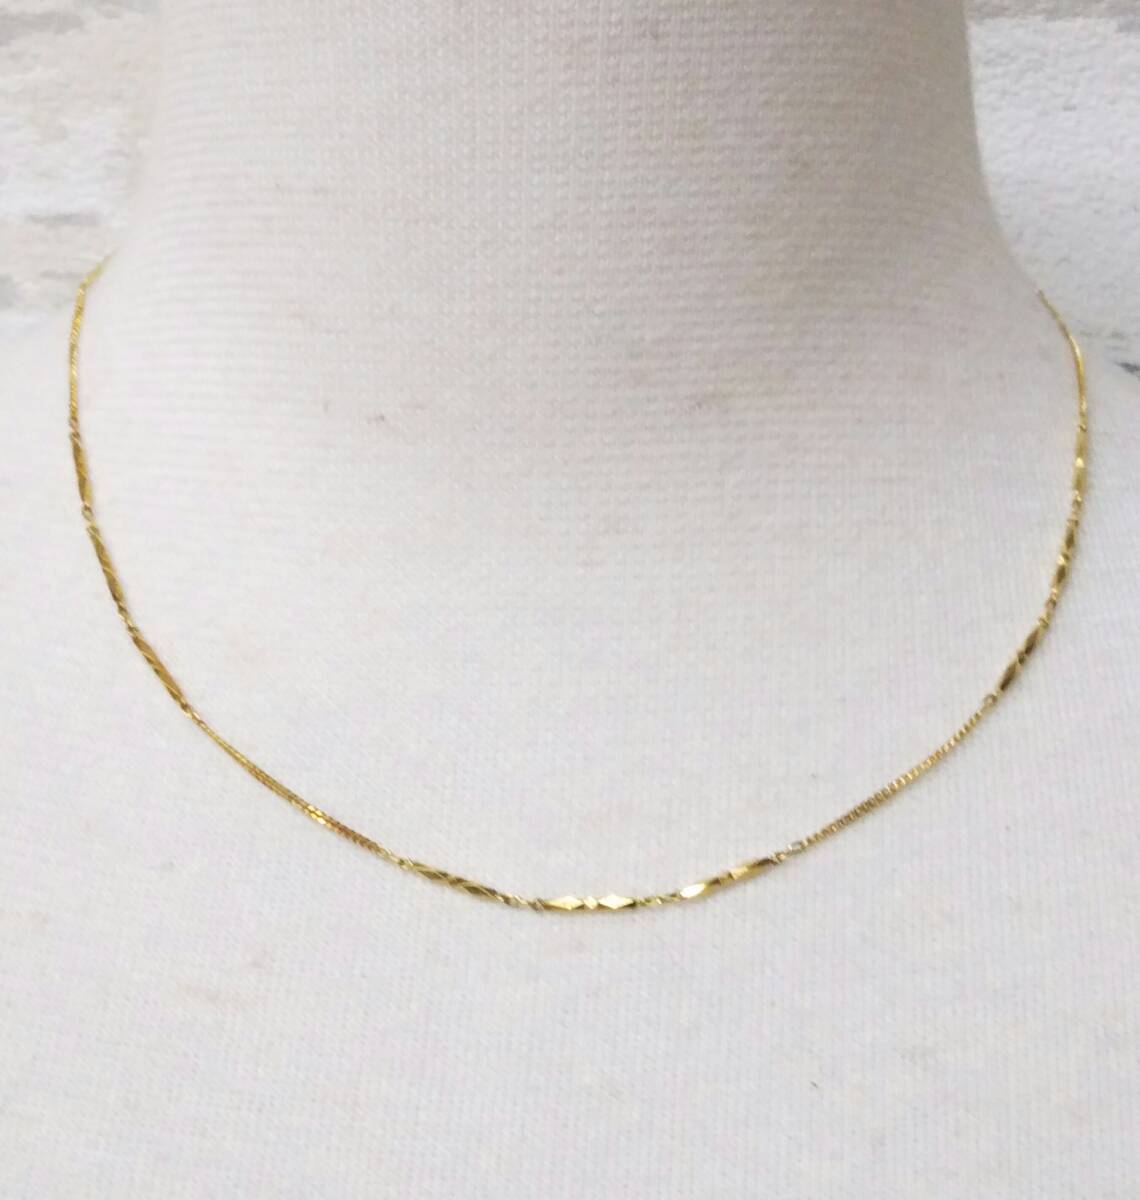 [ cleaning settled ]K18(750 inscription ) gross weight approximately 4.0g approximately 40cm cut . design chain Gold necklace 